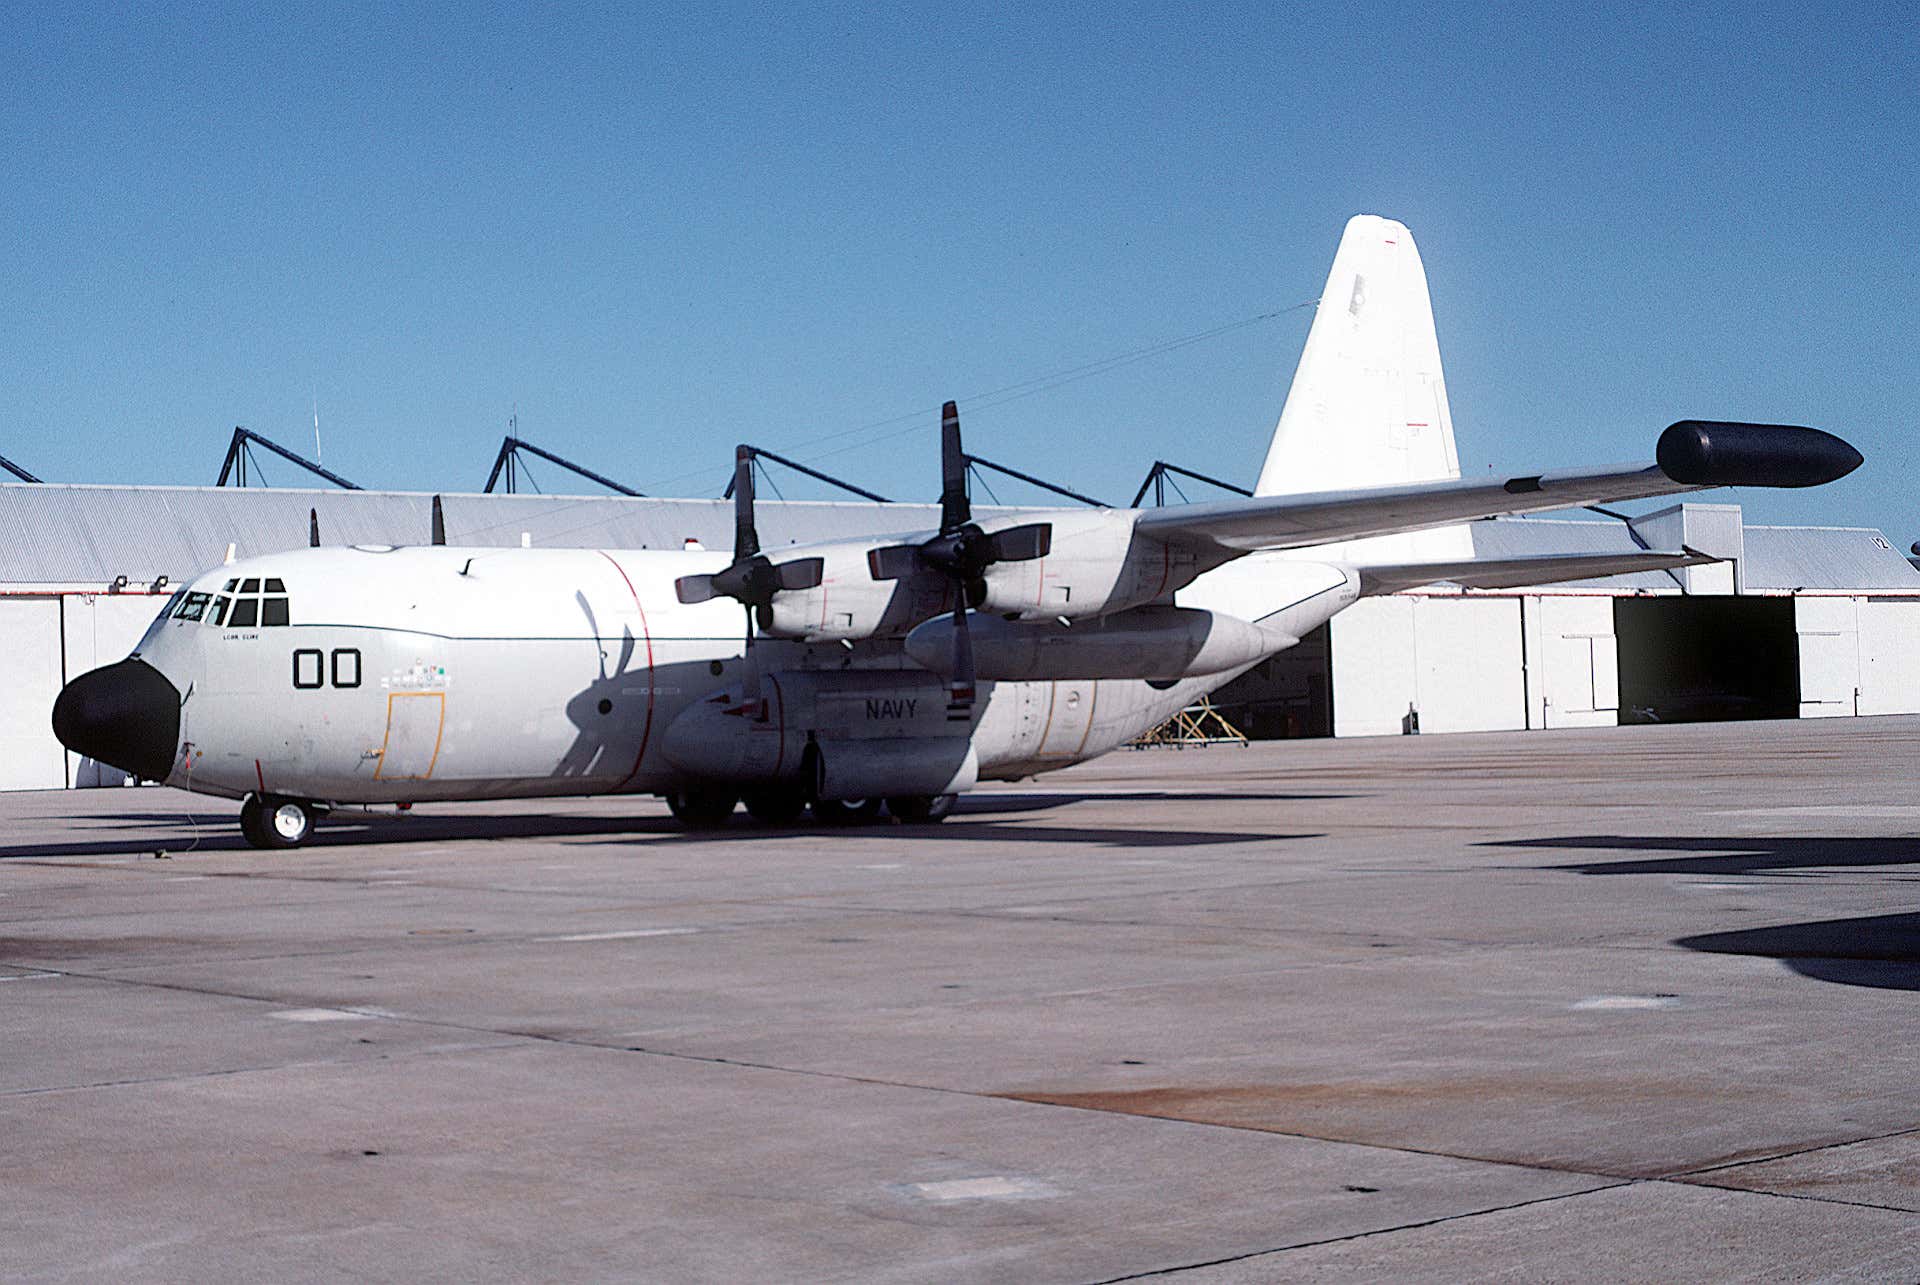 US Navy to Replace Boeing E-6B with C-130J-30 Hercules for Performing TACAMO Mission